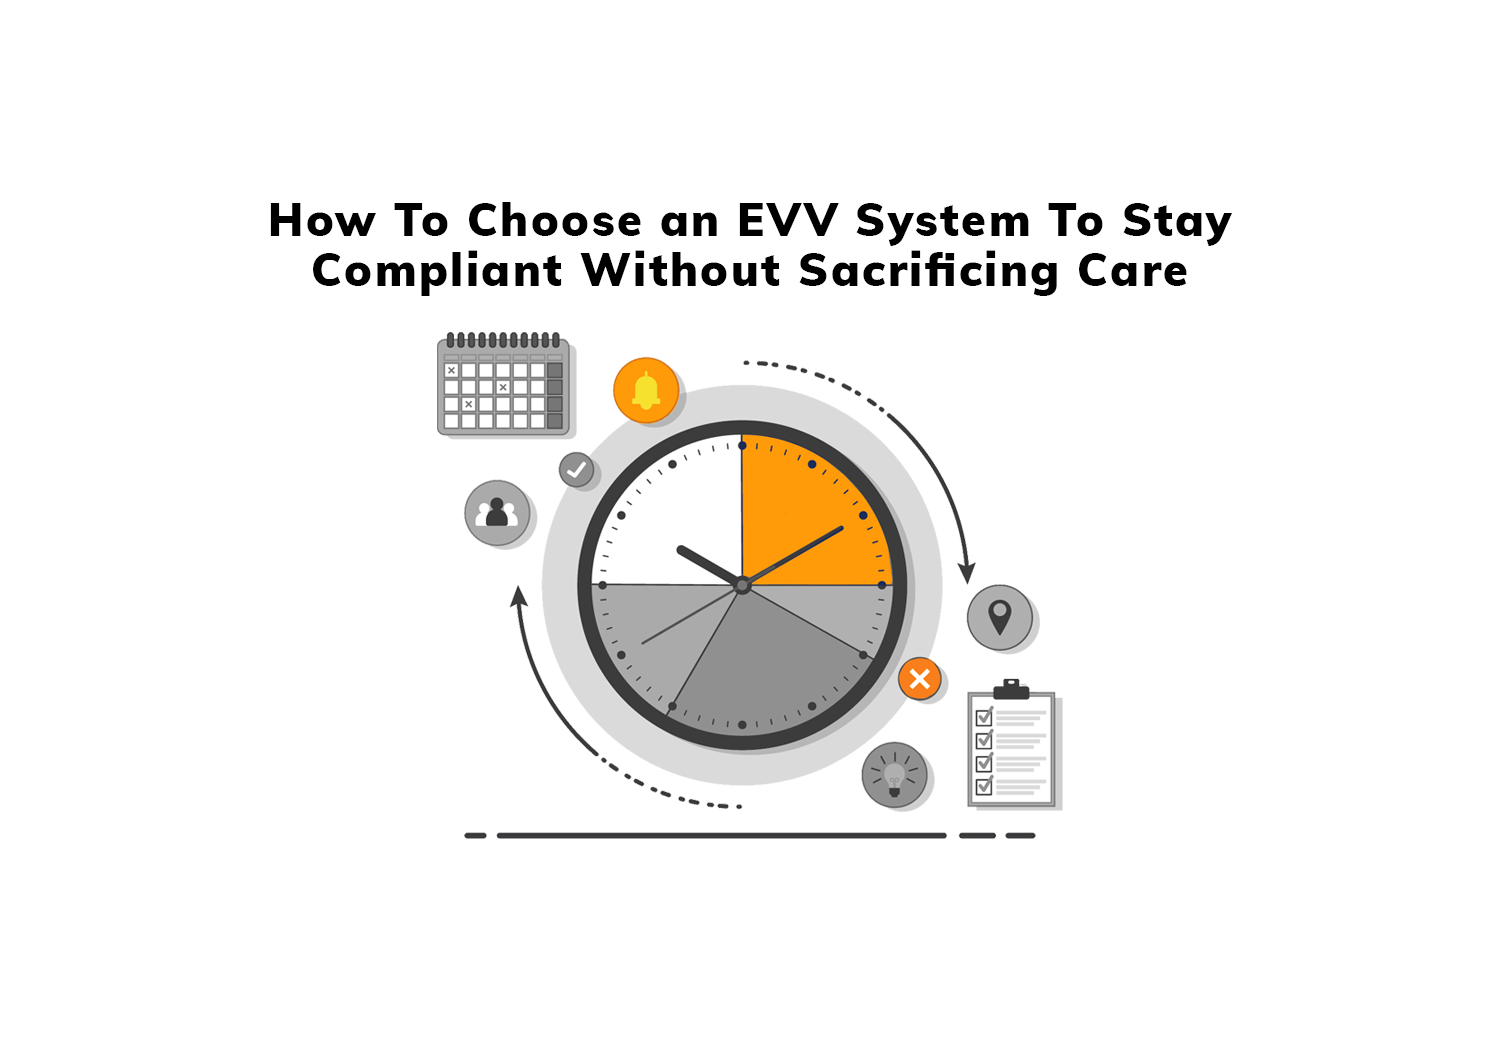 How to Choose an EVV System for Compliance without Sacrificing the Quality of Care Services